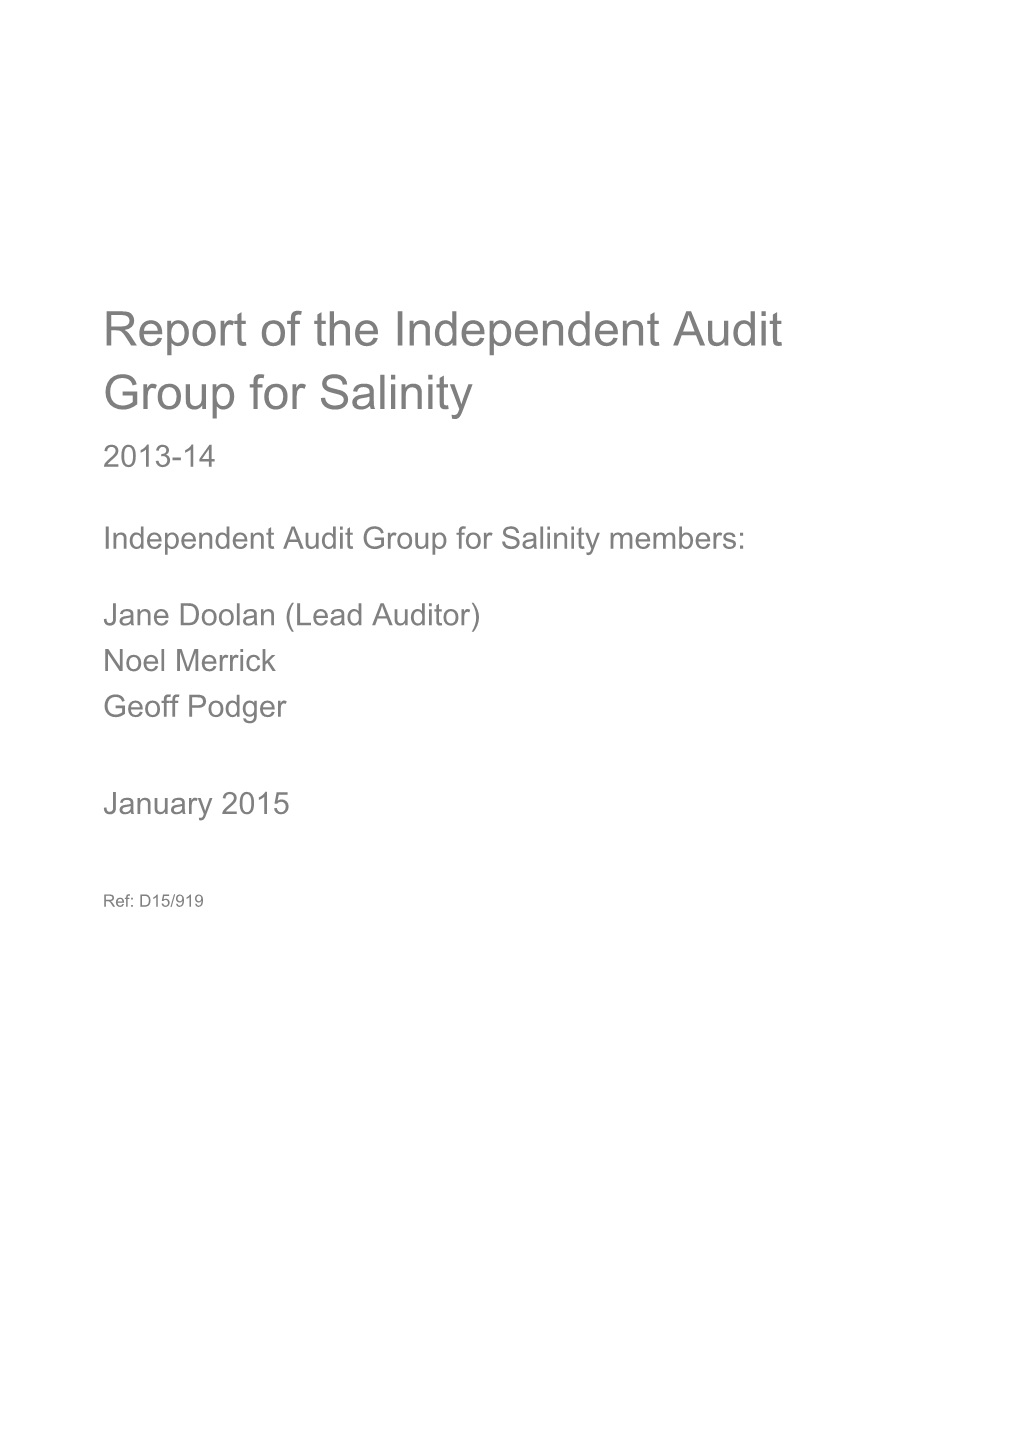 Report of the Independent Audit Group for Salinity